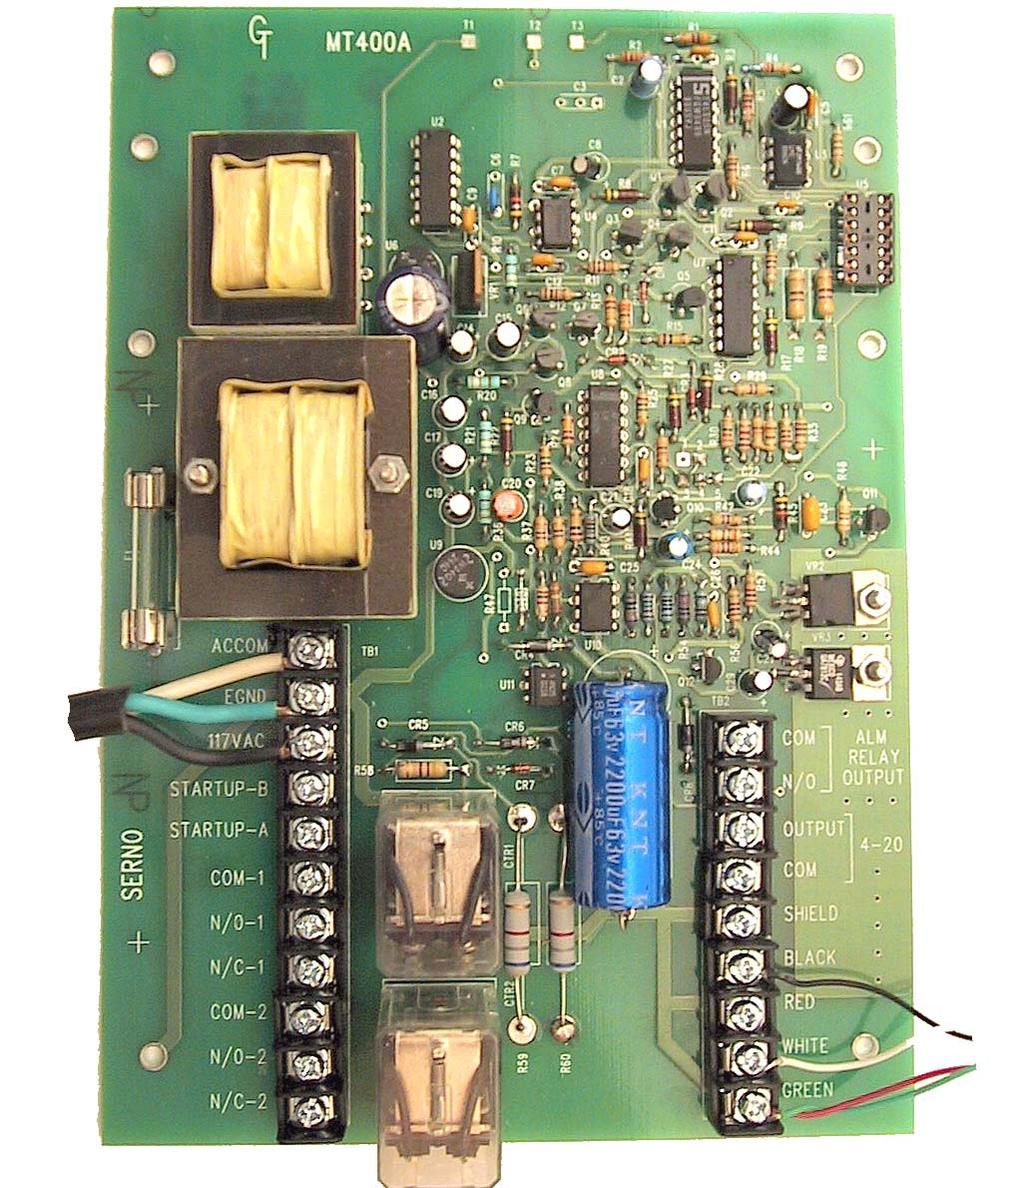 MT400A LAYOUT: RIBBON CABLE TO DISPLAY 1 AMP FUSE 117VAC* BOARD POWER EXTERNAL ALARM CONTACTS MOTOR STARTUP VOLTAGE OFFSET RELAY #1 (90%)